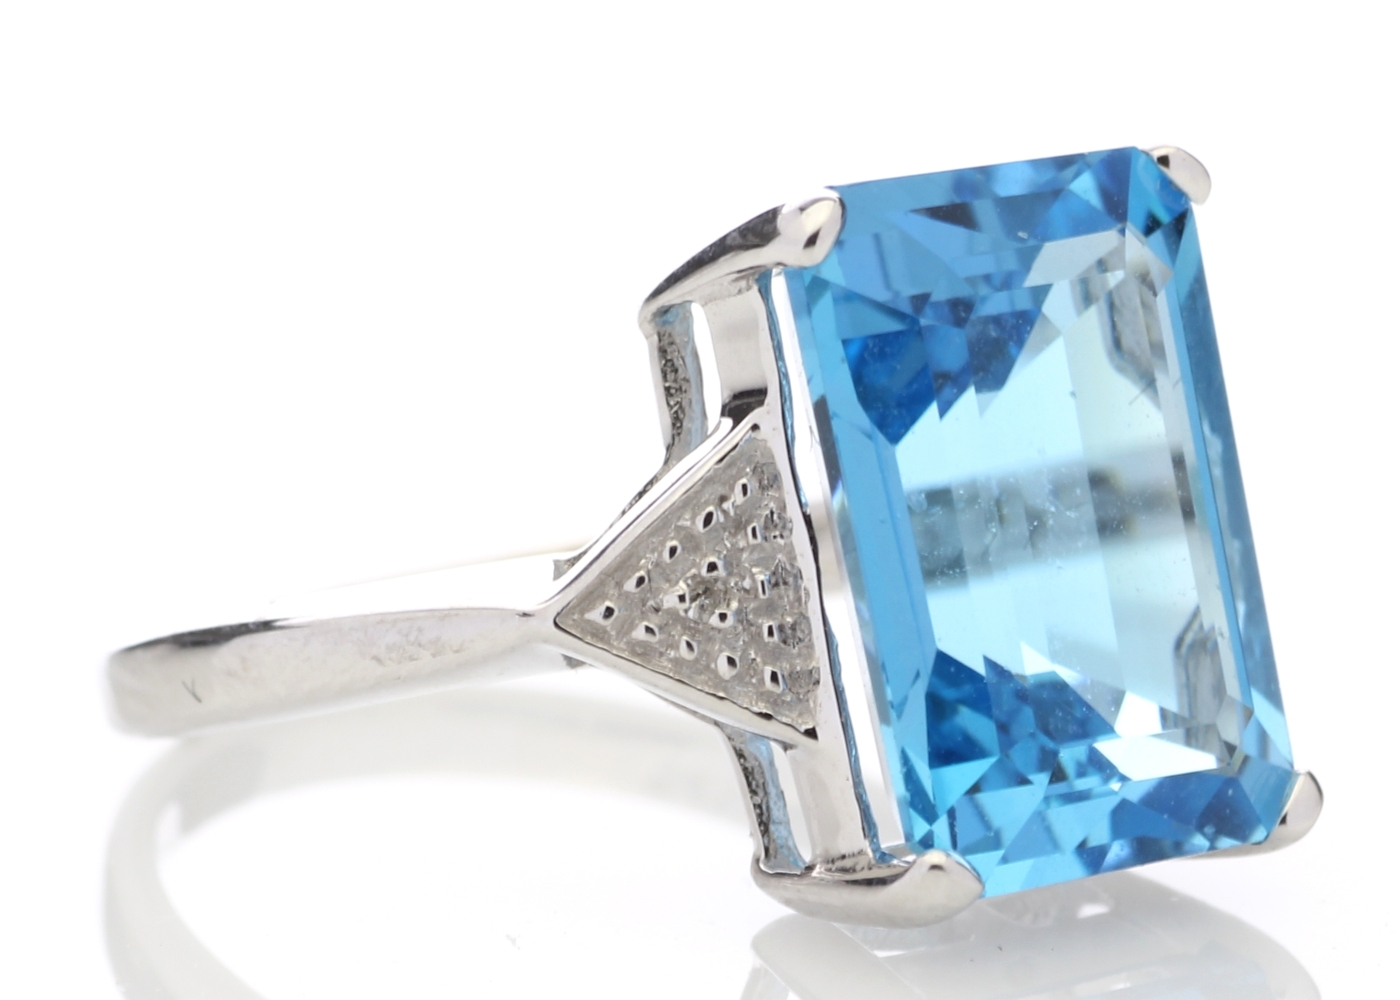 9k White Gold Diamond And Blue Topaz Ring 8.25 Carats - Image 4 of 6